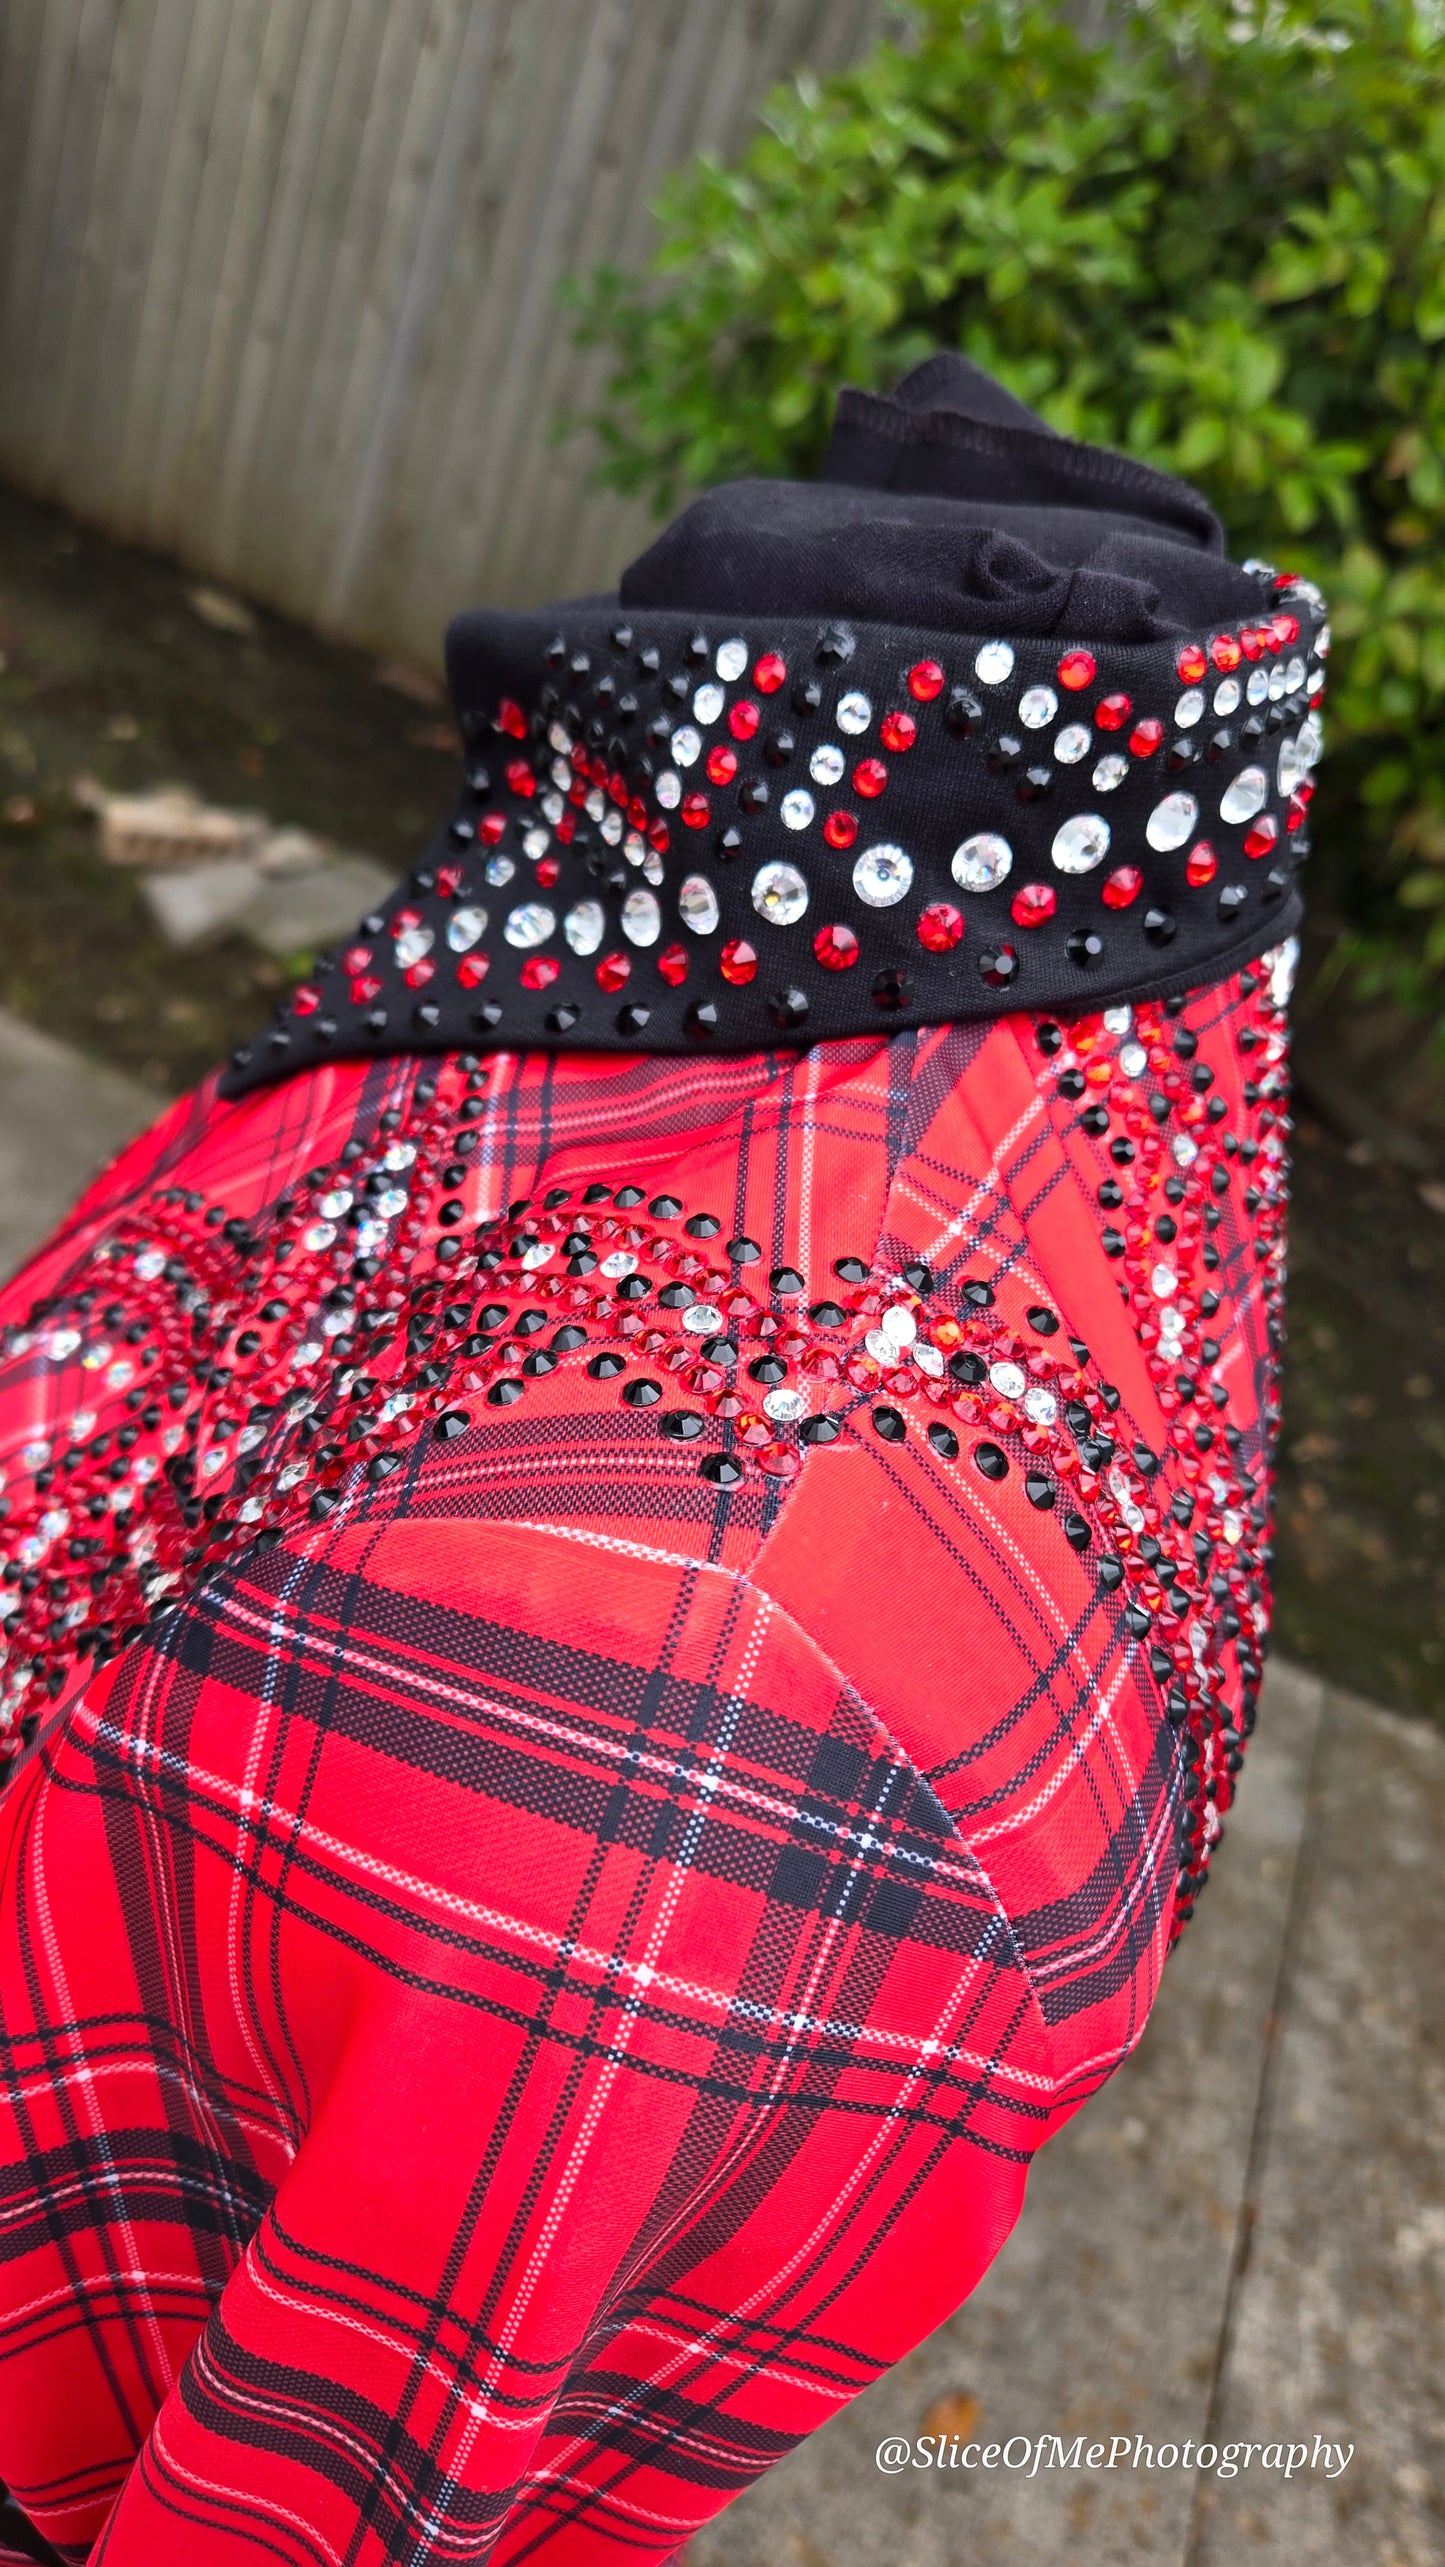 Size Medium Red Plaid stretch with clear crystals